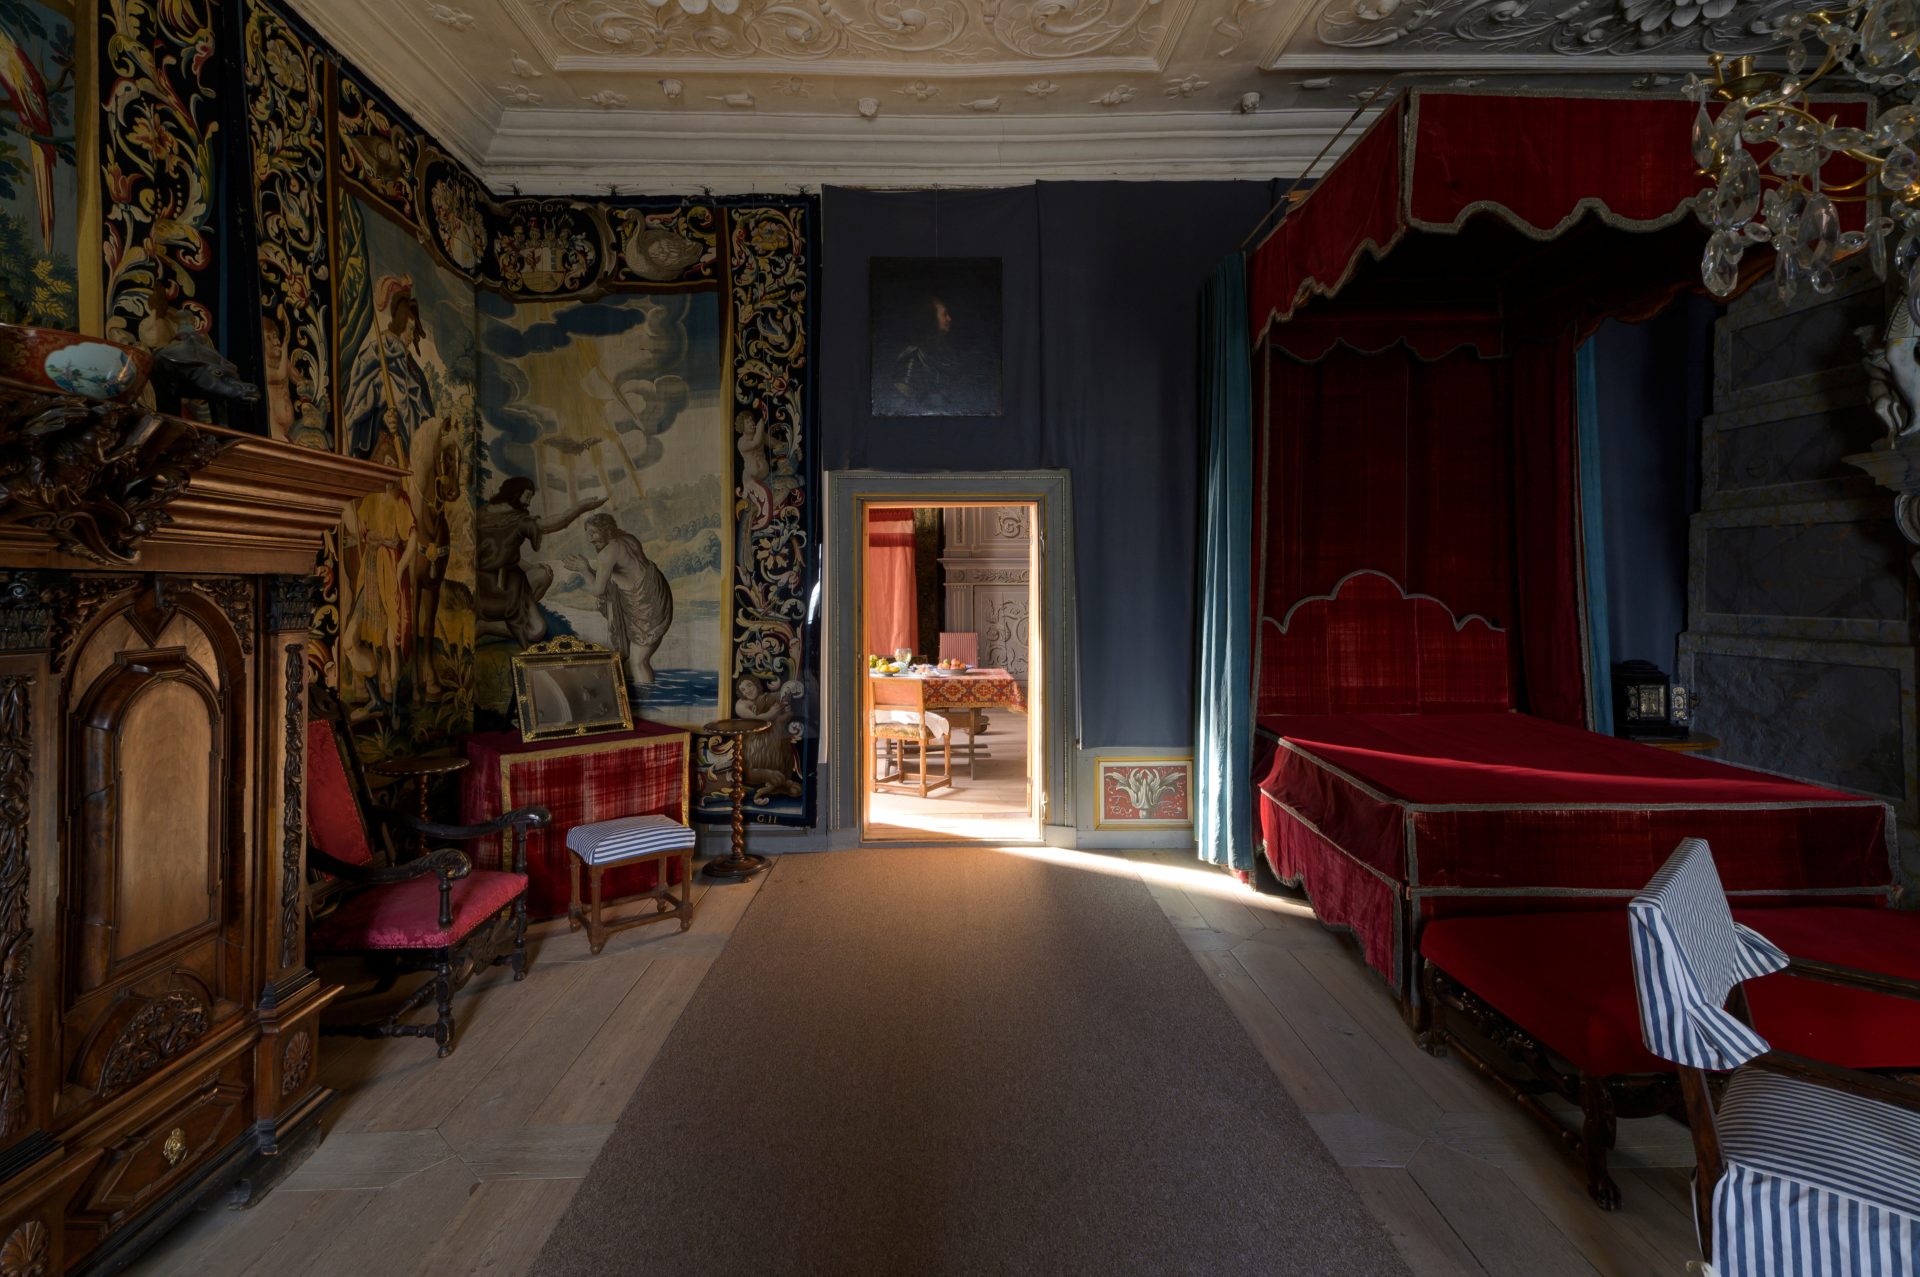 A view from the Countess's bedchamber.